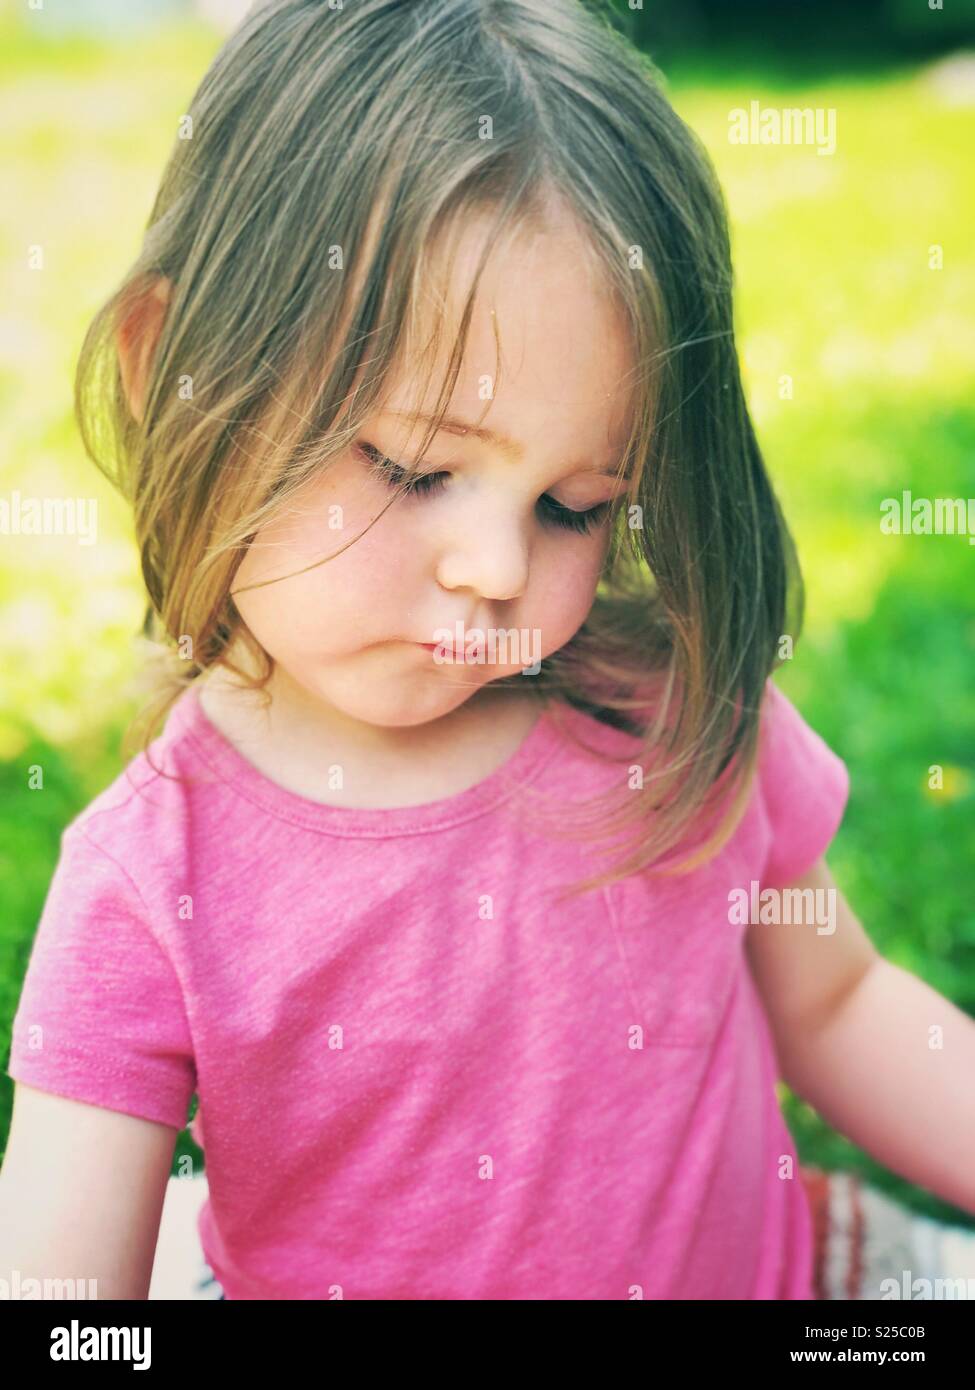 Toddler girl in pink t-shirt sitting outside looking down Stock Photo